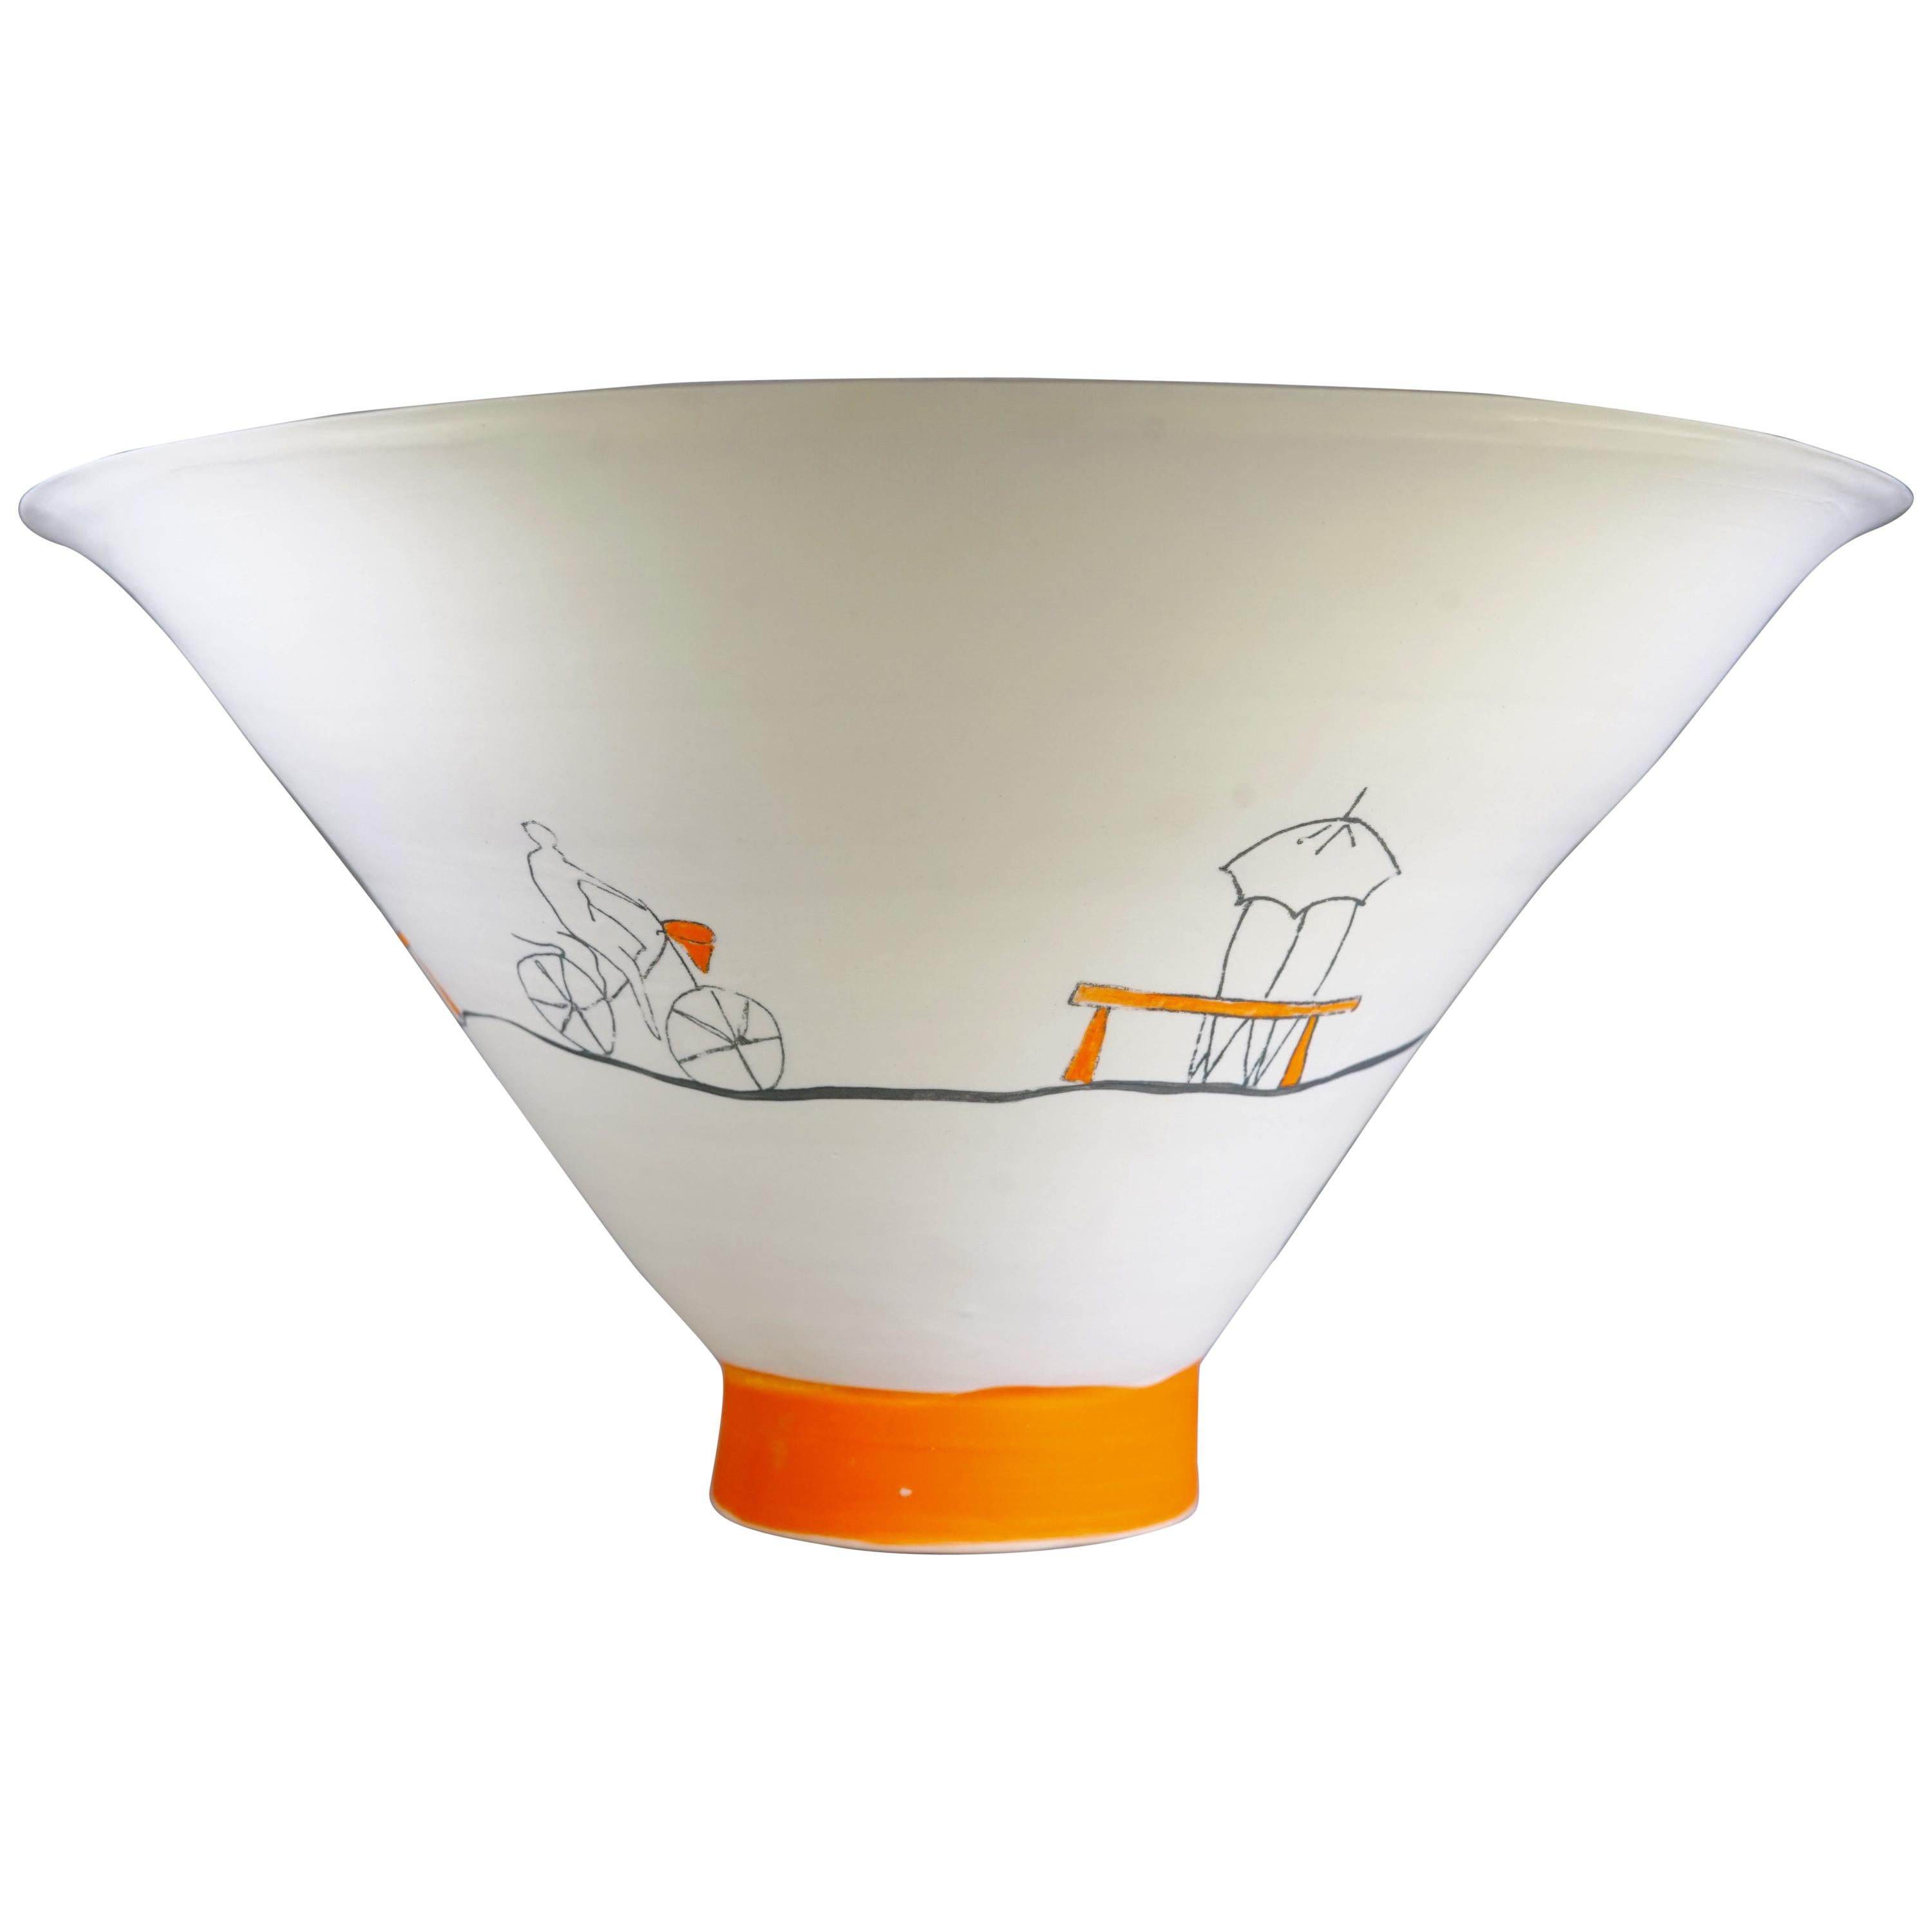 French Contemporary White & Orange Pottery Bowl with Hand Painted Beach Scene